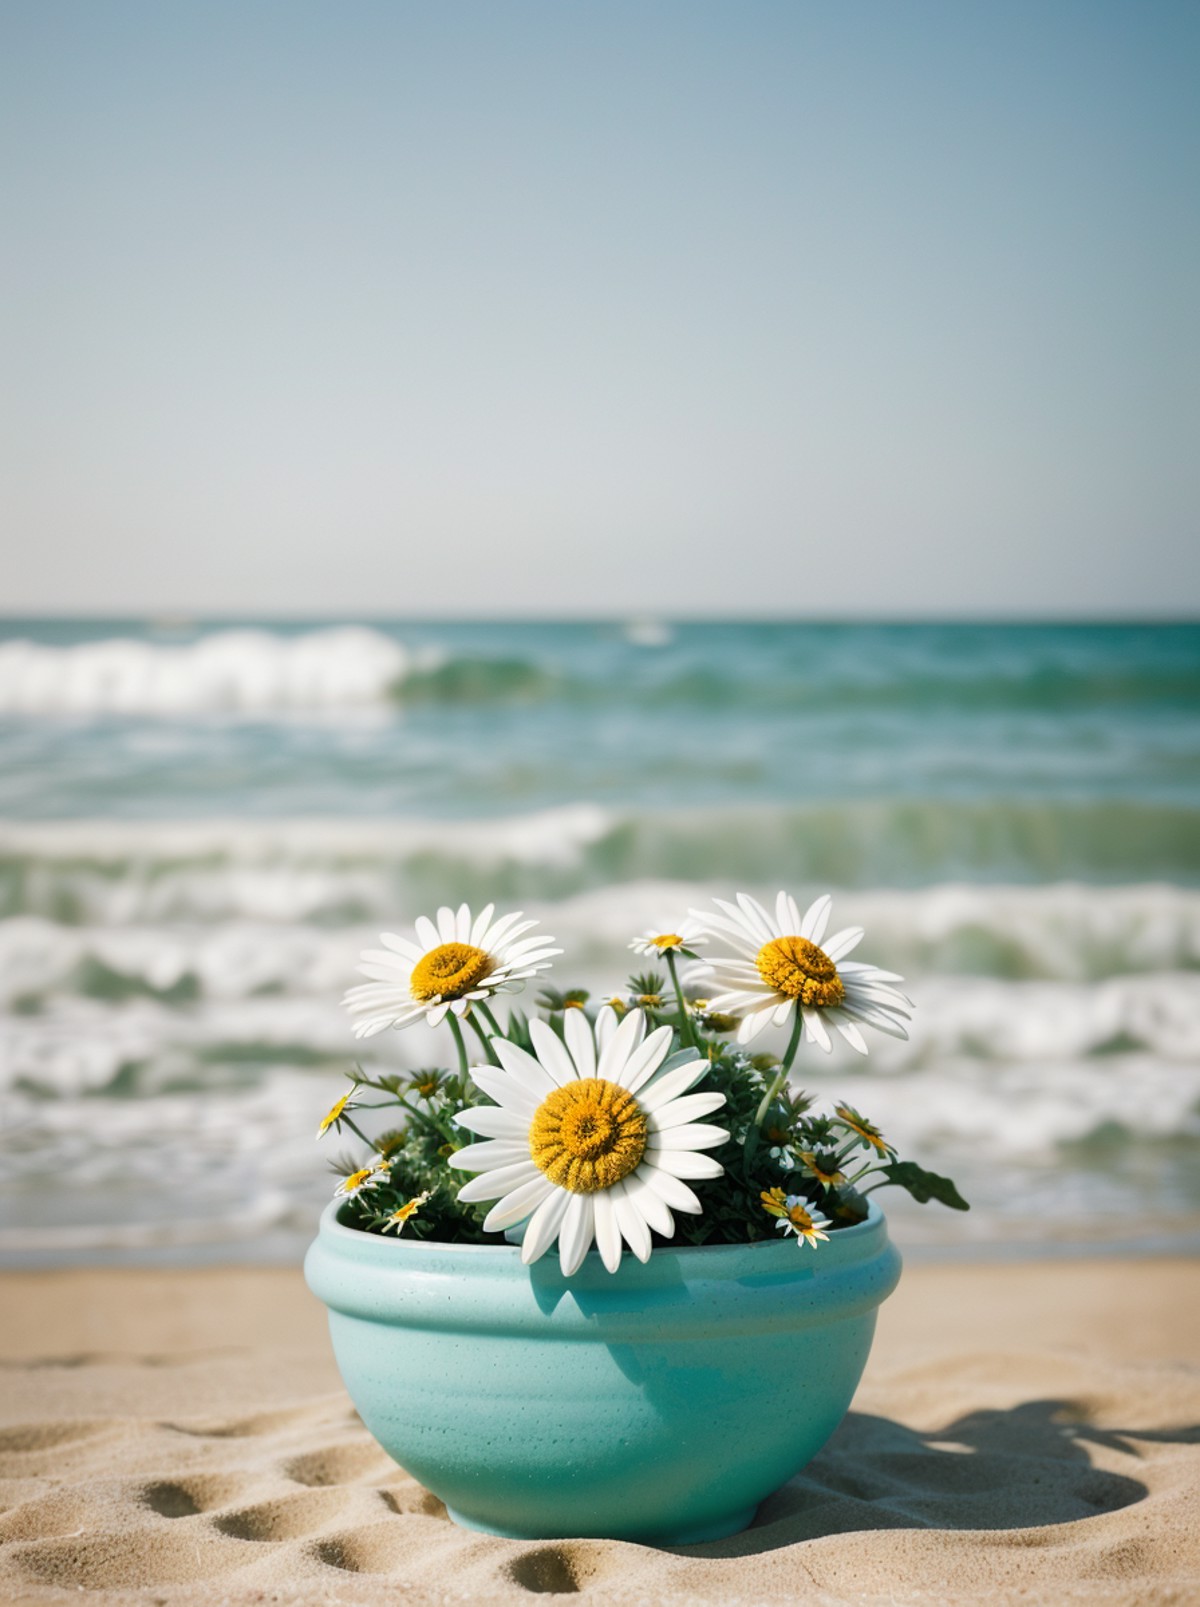 Bavarian ([Daisy:Daisies:2]:1.2) , Ceramic and Groovy, Rule of Thirds, Geeky beach, Hazy conditions, soft focus, Suffering...